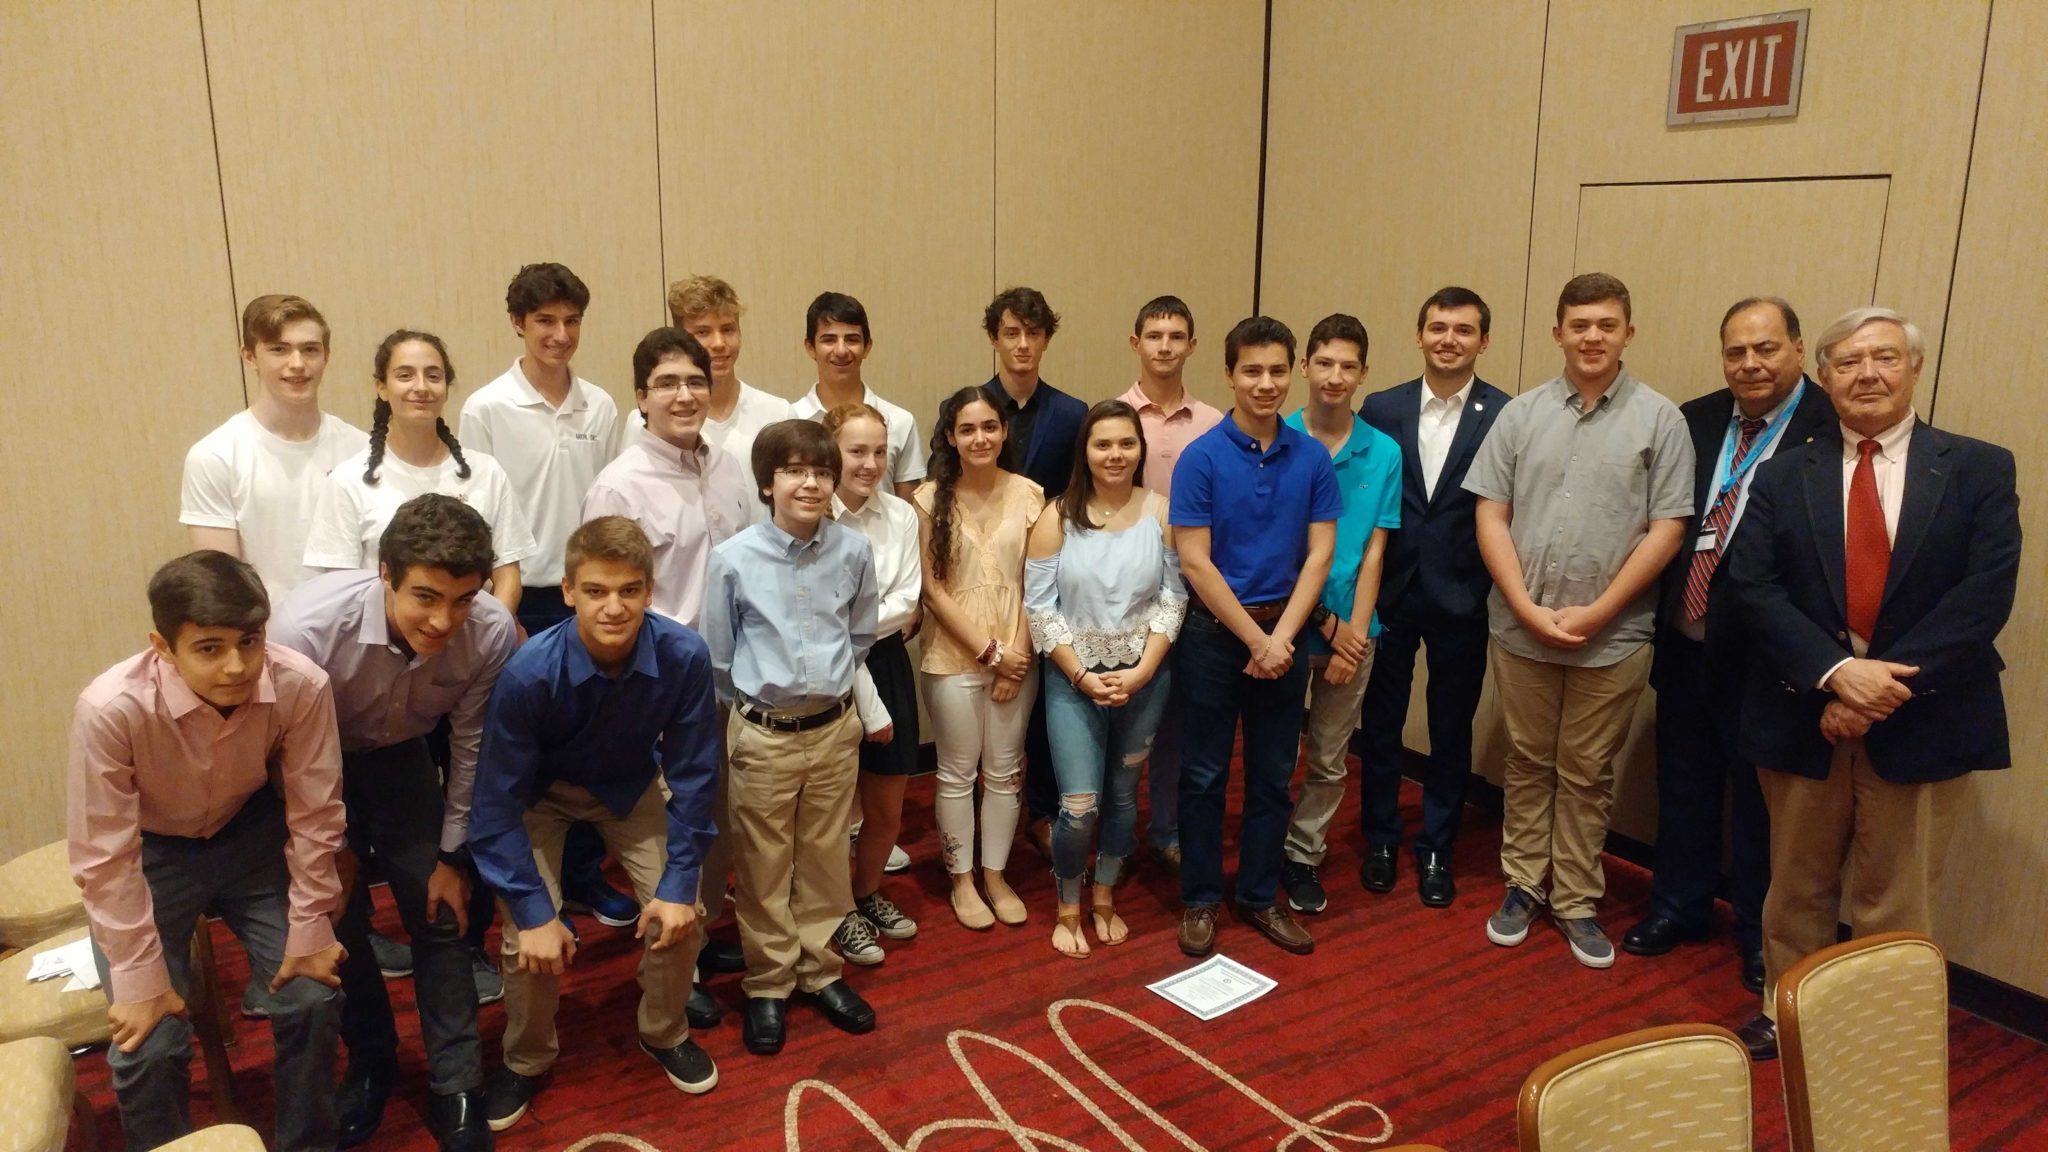 Teams compete in National Hellenic History Championship